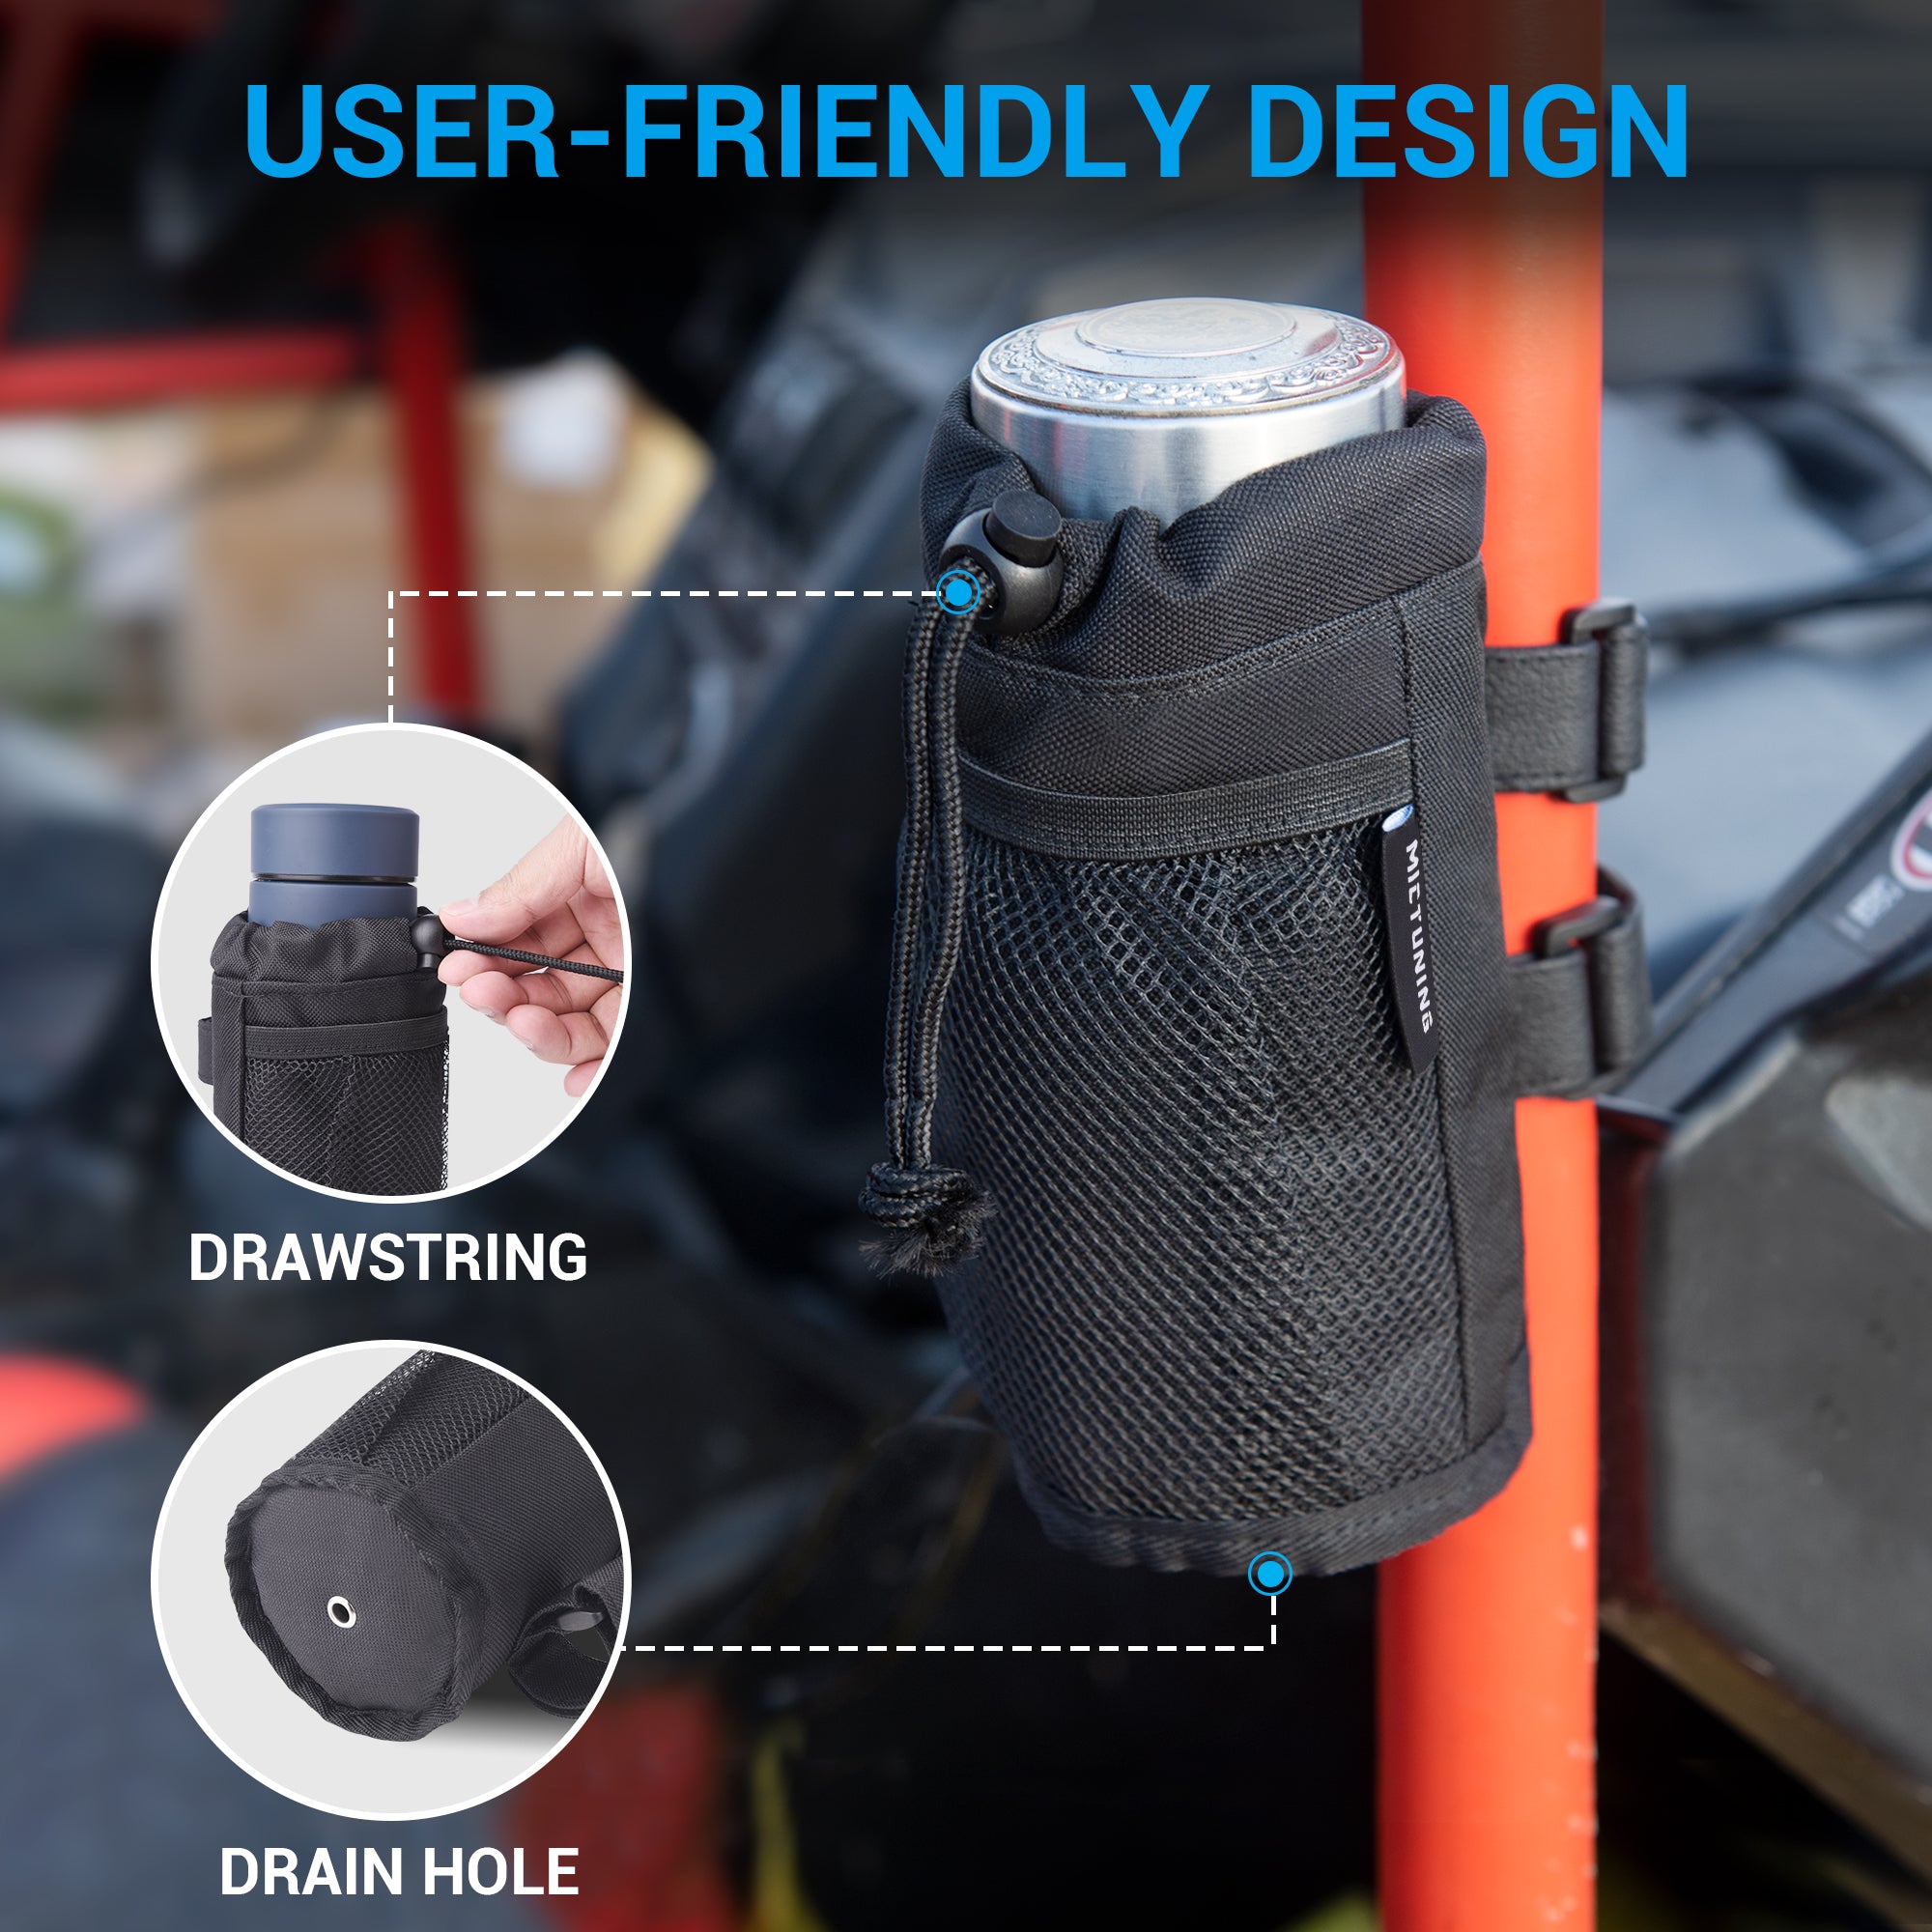 UTV Roll Bar Cup Holder, Bottle Holder with Thermal Insulation Layer